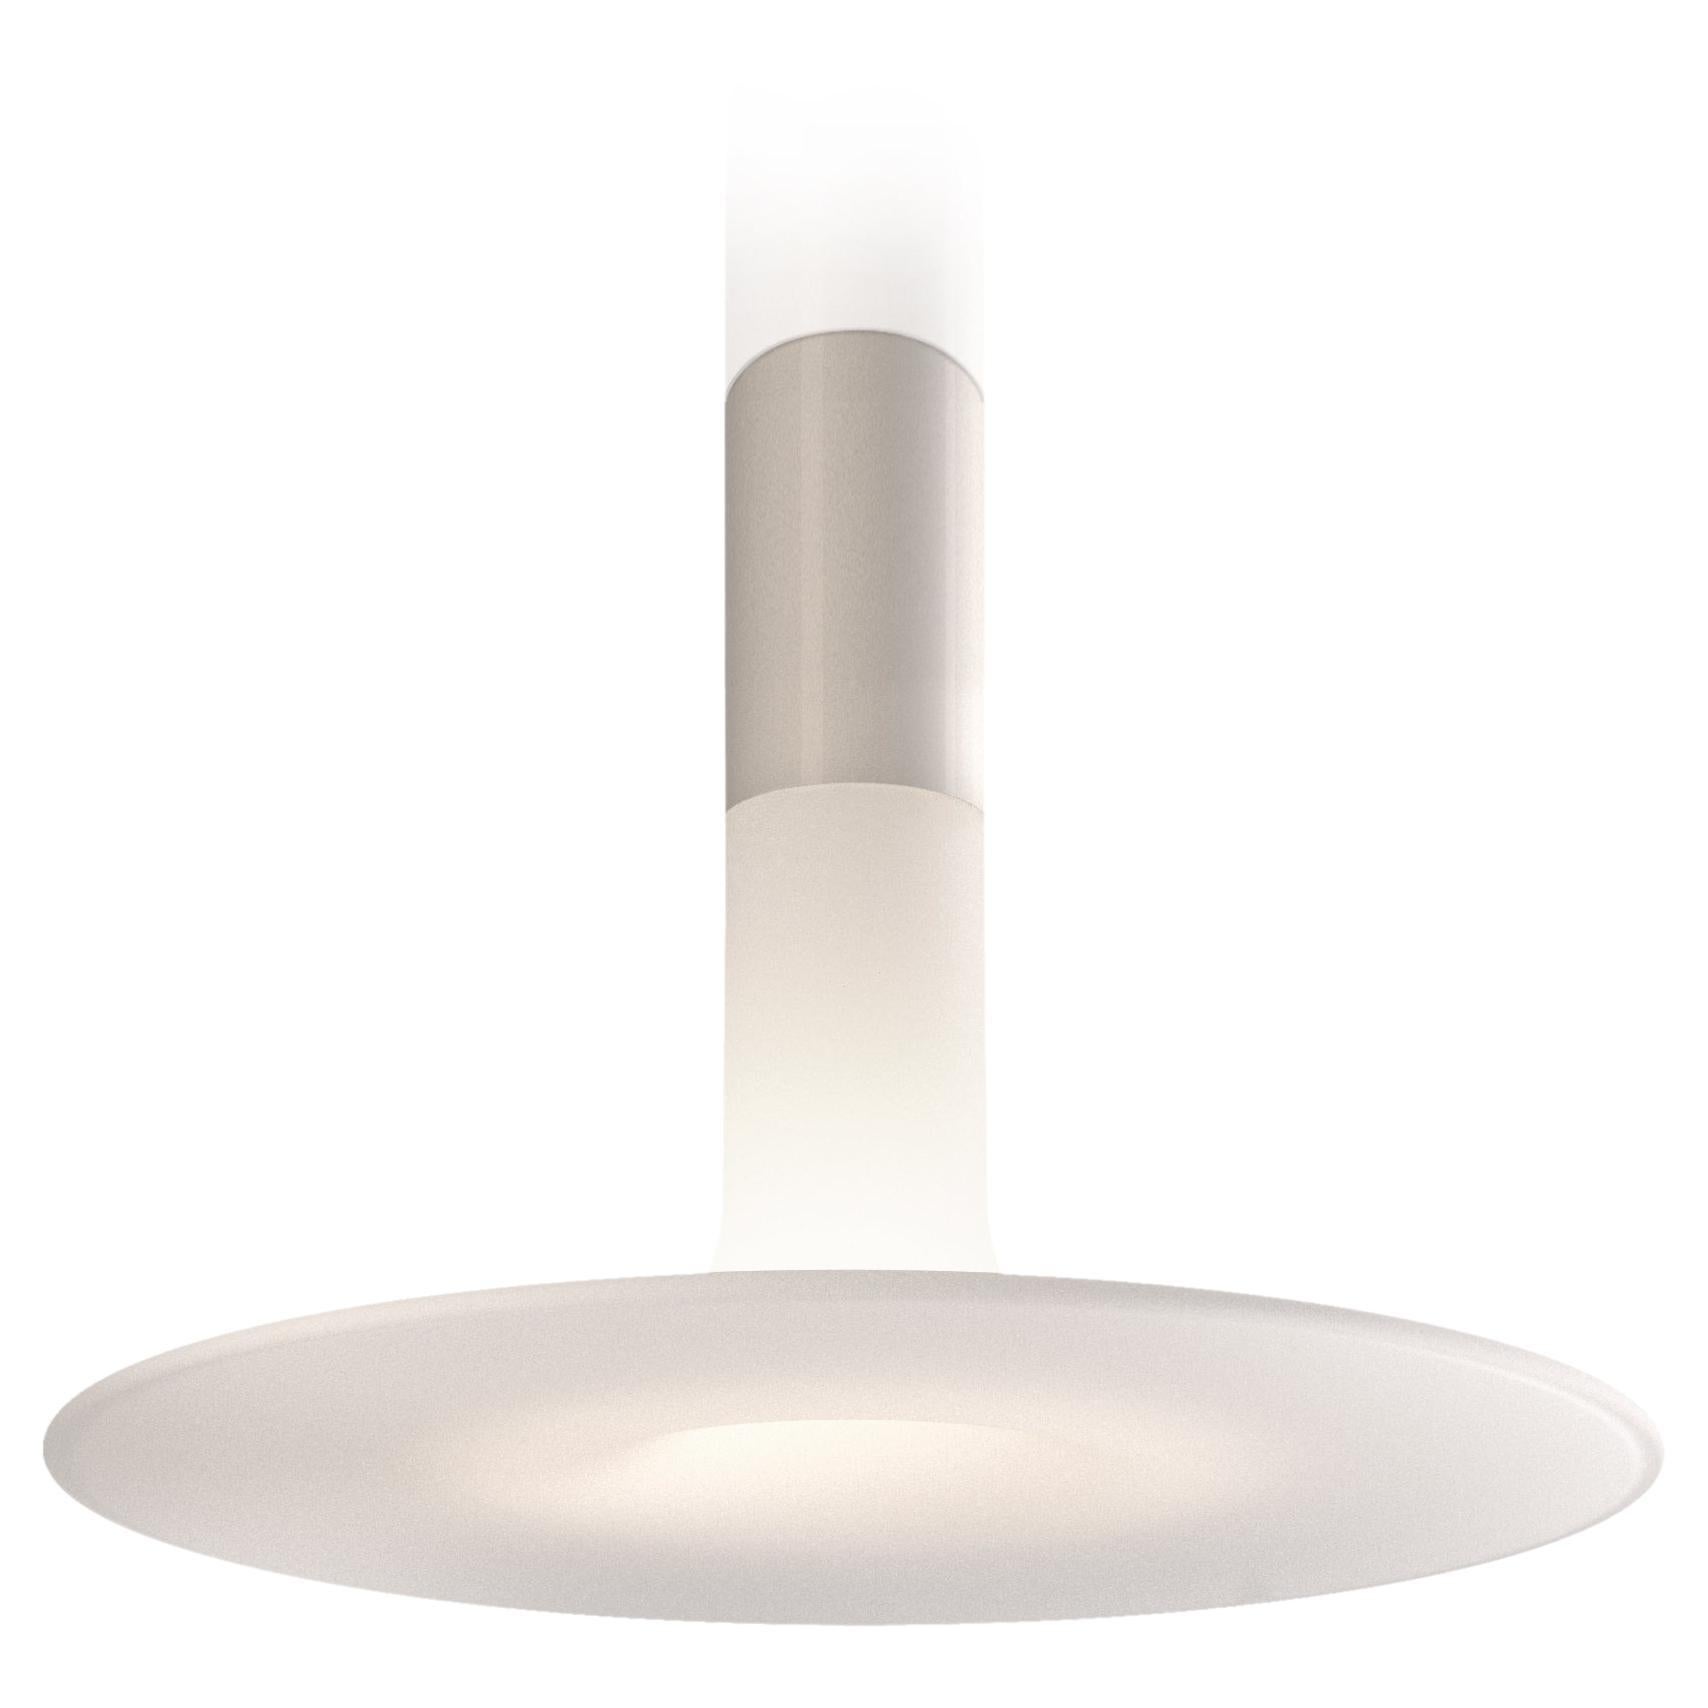 Contemporary 'Louis 48' Ceiling Lamp by Studio 14 for KDLN For Sale